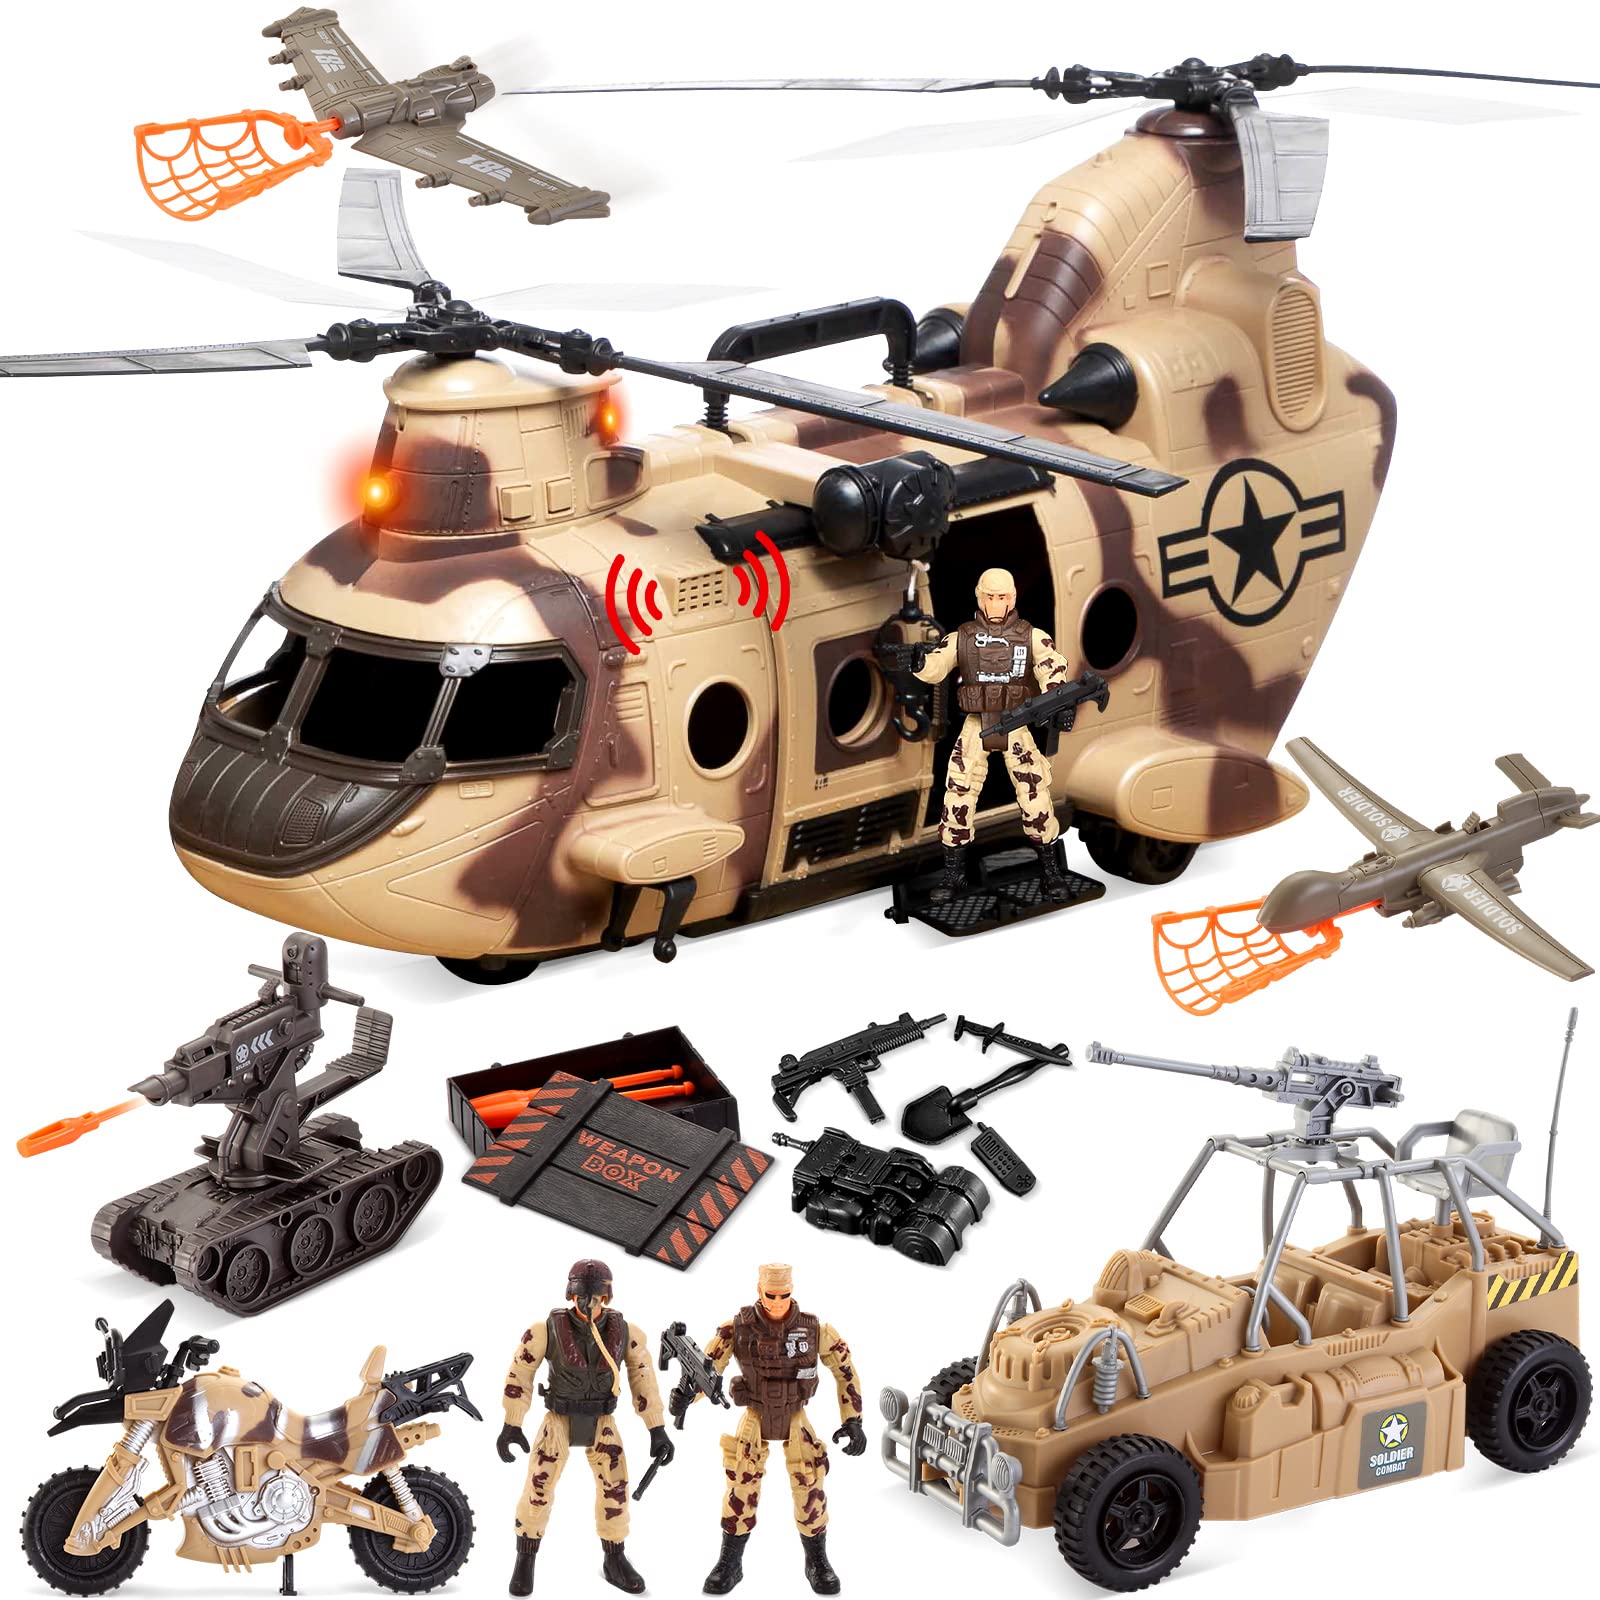 JOYIN 10-in-1 Jumbo Military Combat Helicopter Toy Set with Military  Vehicle Toys and Military Action Figures, Realistic Lights and Sounds, for  Combat Toys Imaginative Play price in UAE,  UAE